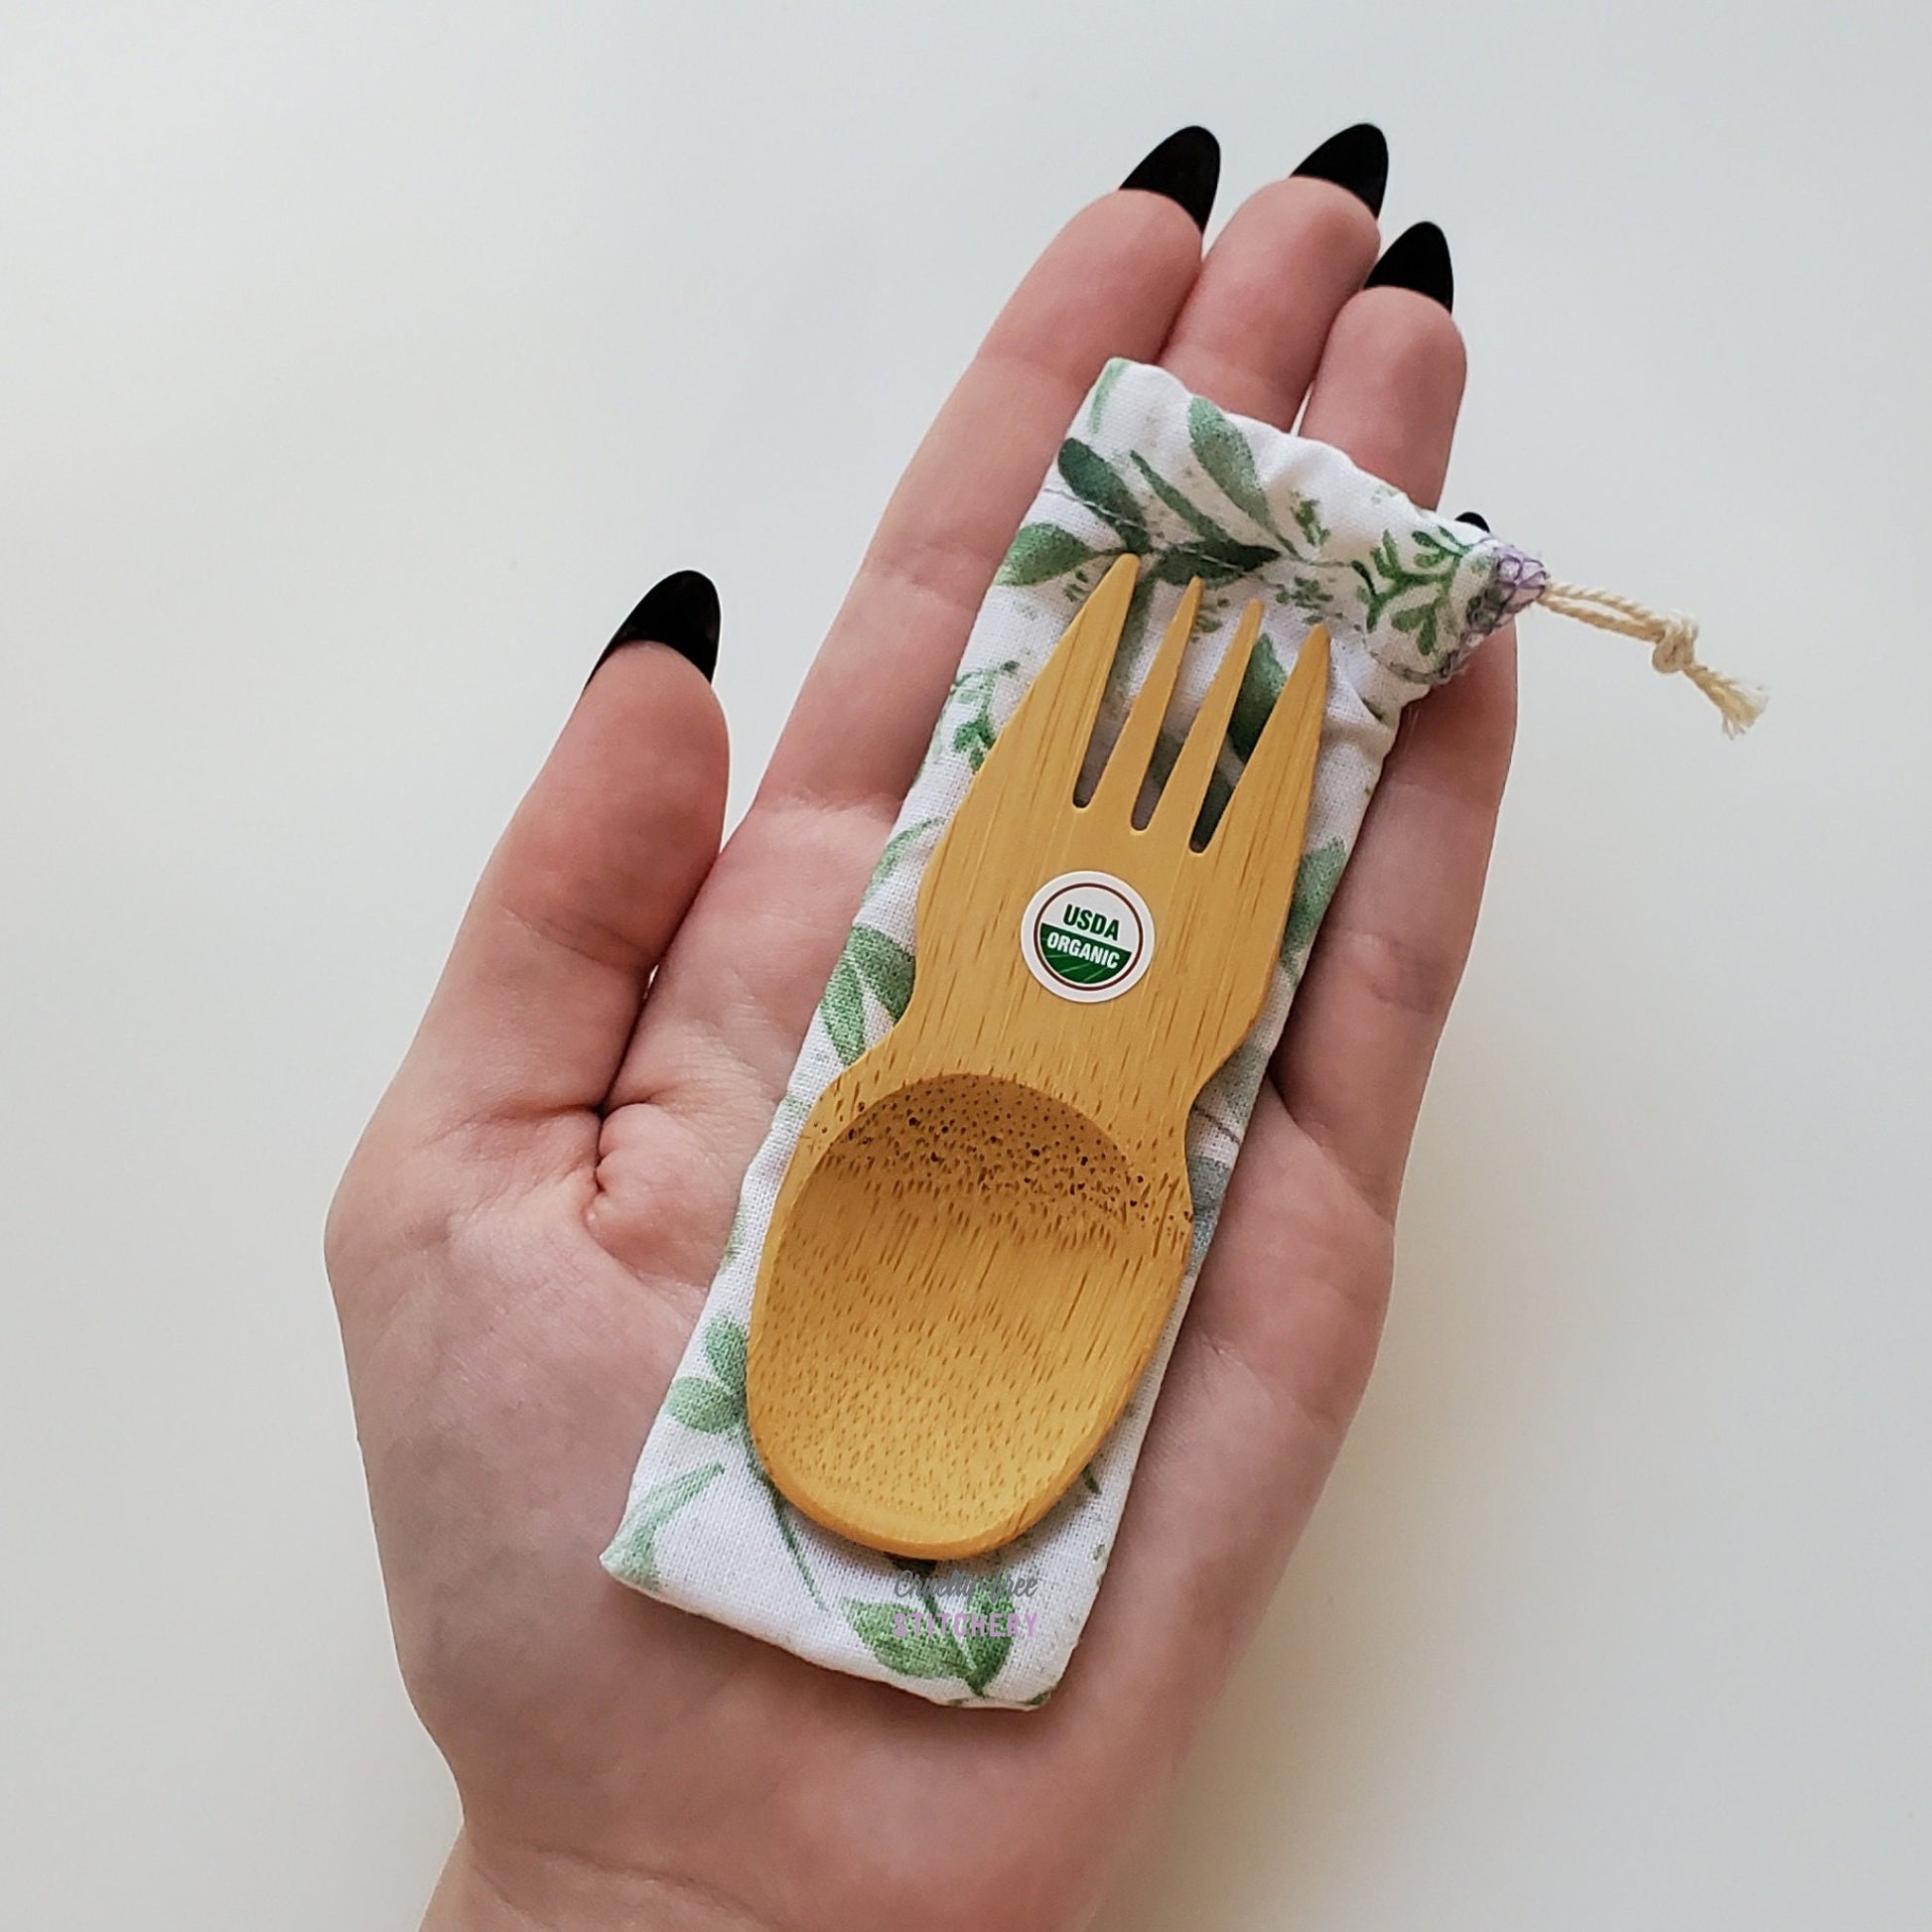 Reusable bamboo spork with pouch. White with eucalyptus leaves print fabric pouch with bamboo spork on top, laid on a hand for size reference. The spork is slightly longer than the fingers.